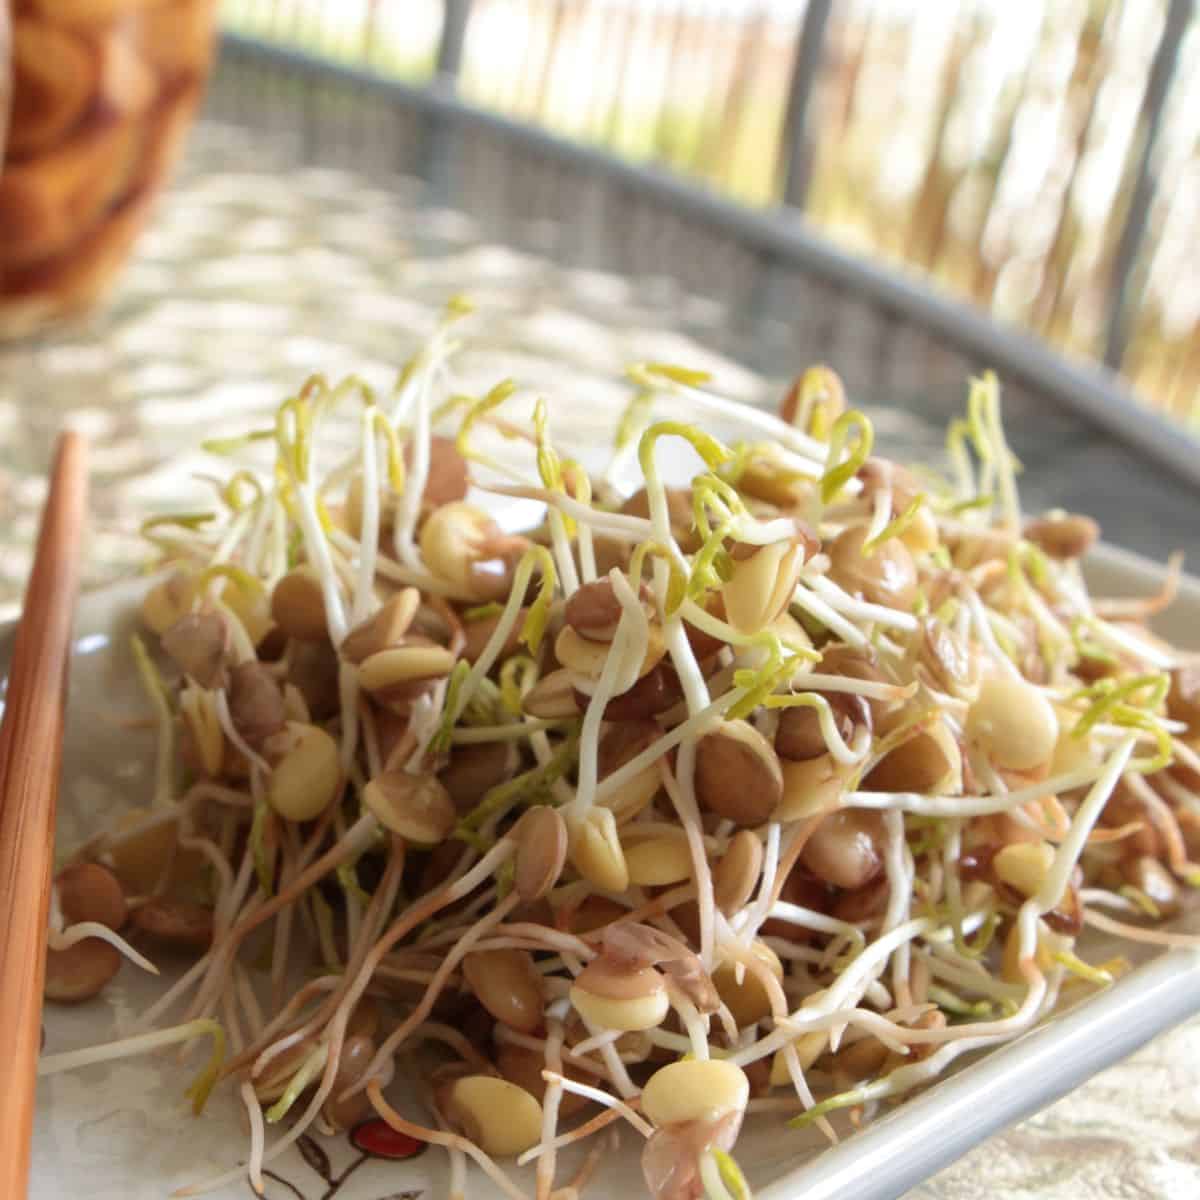 The best plate of sprouts to eat raw, complete with chopsticks, on a table.